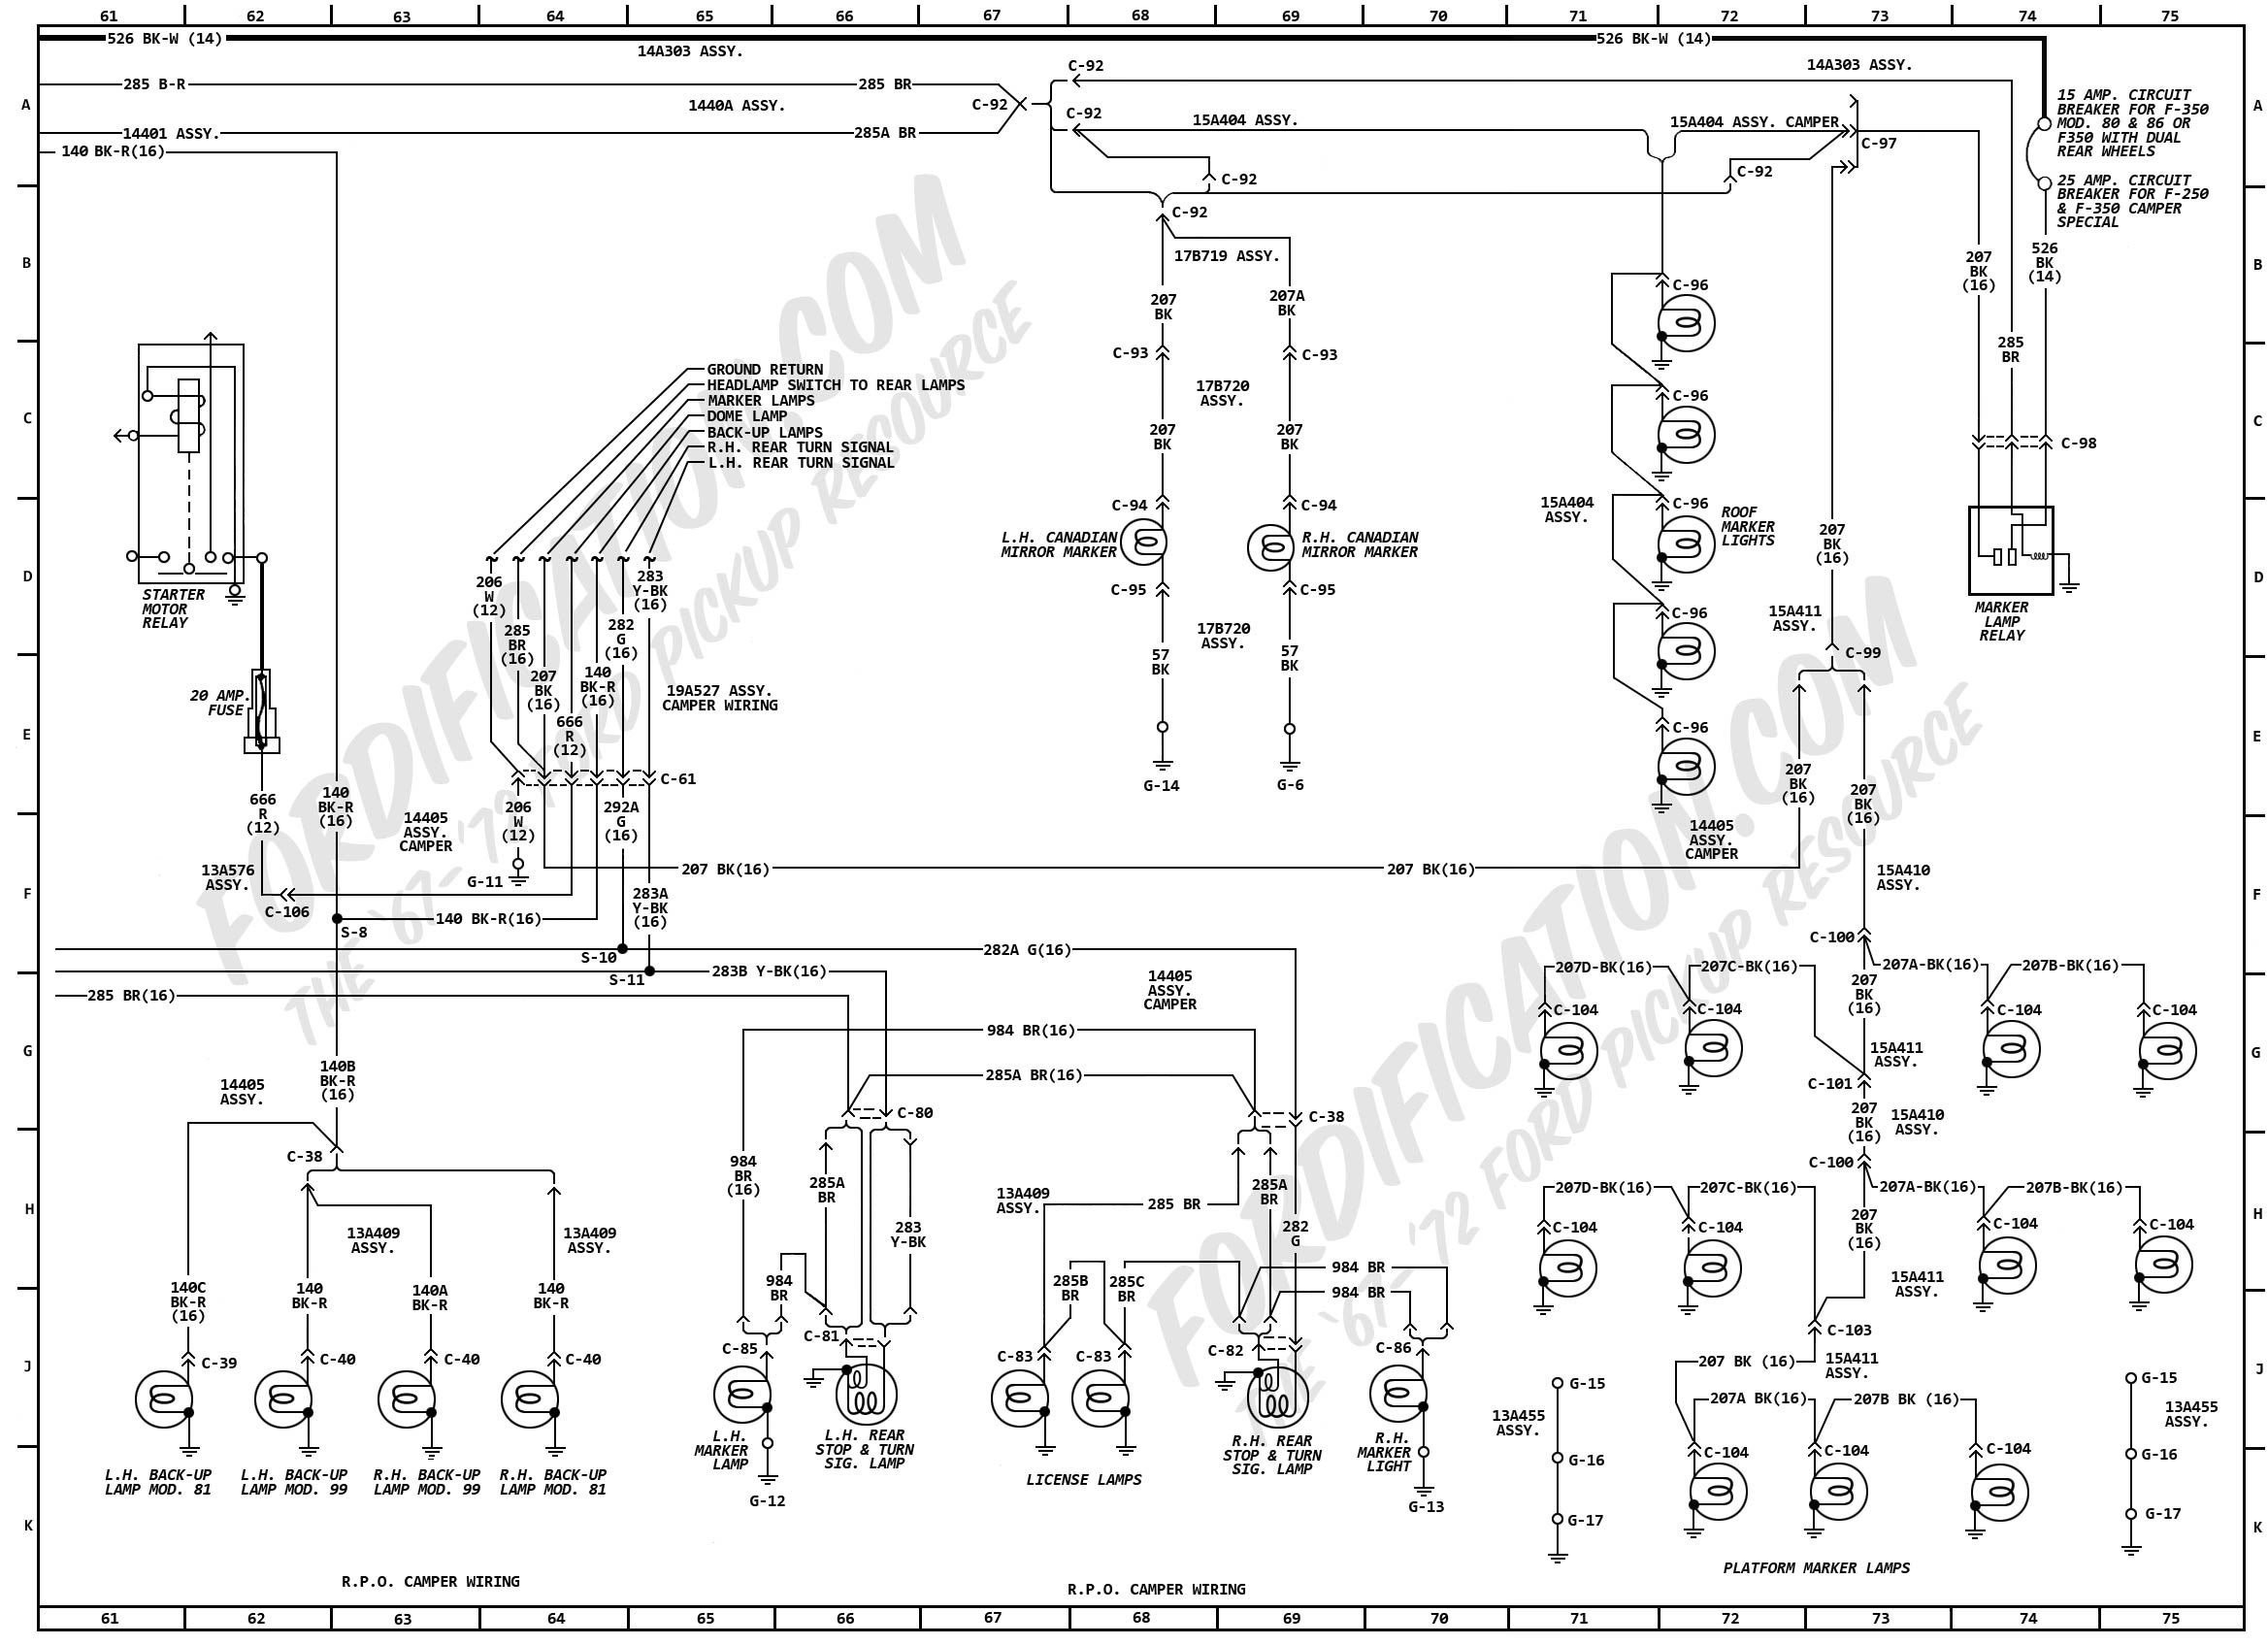 1995 Ford F250 Wiring Diagram from www.fordification.com